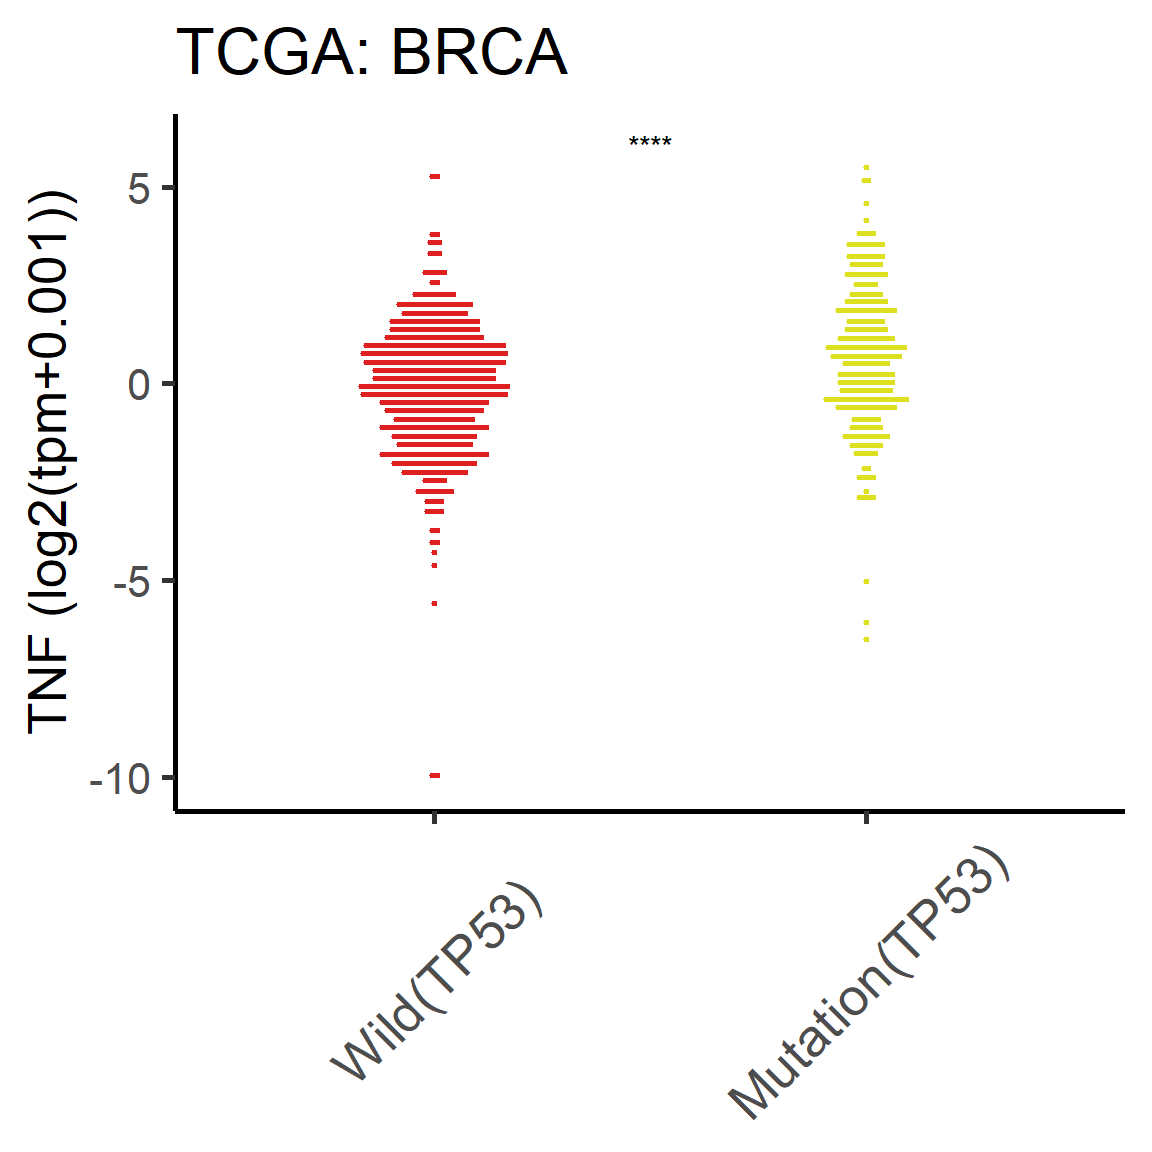 The difference of mRNA TNF between TP53-mut and TP53-wild tumor samples in BRCA cancer